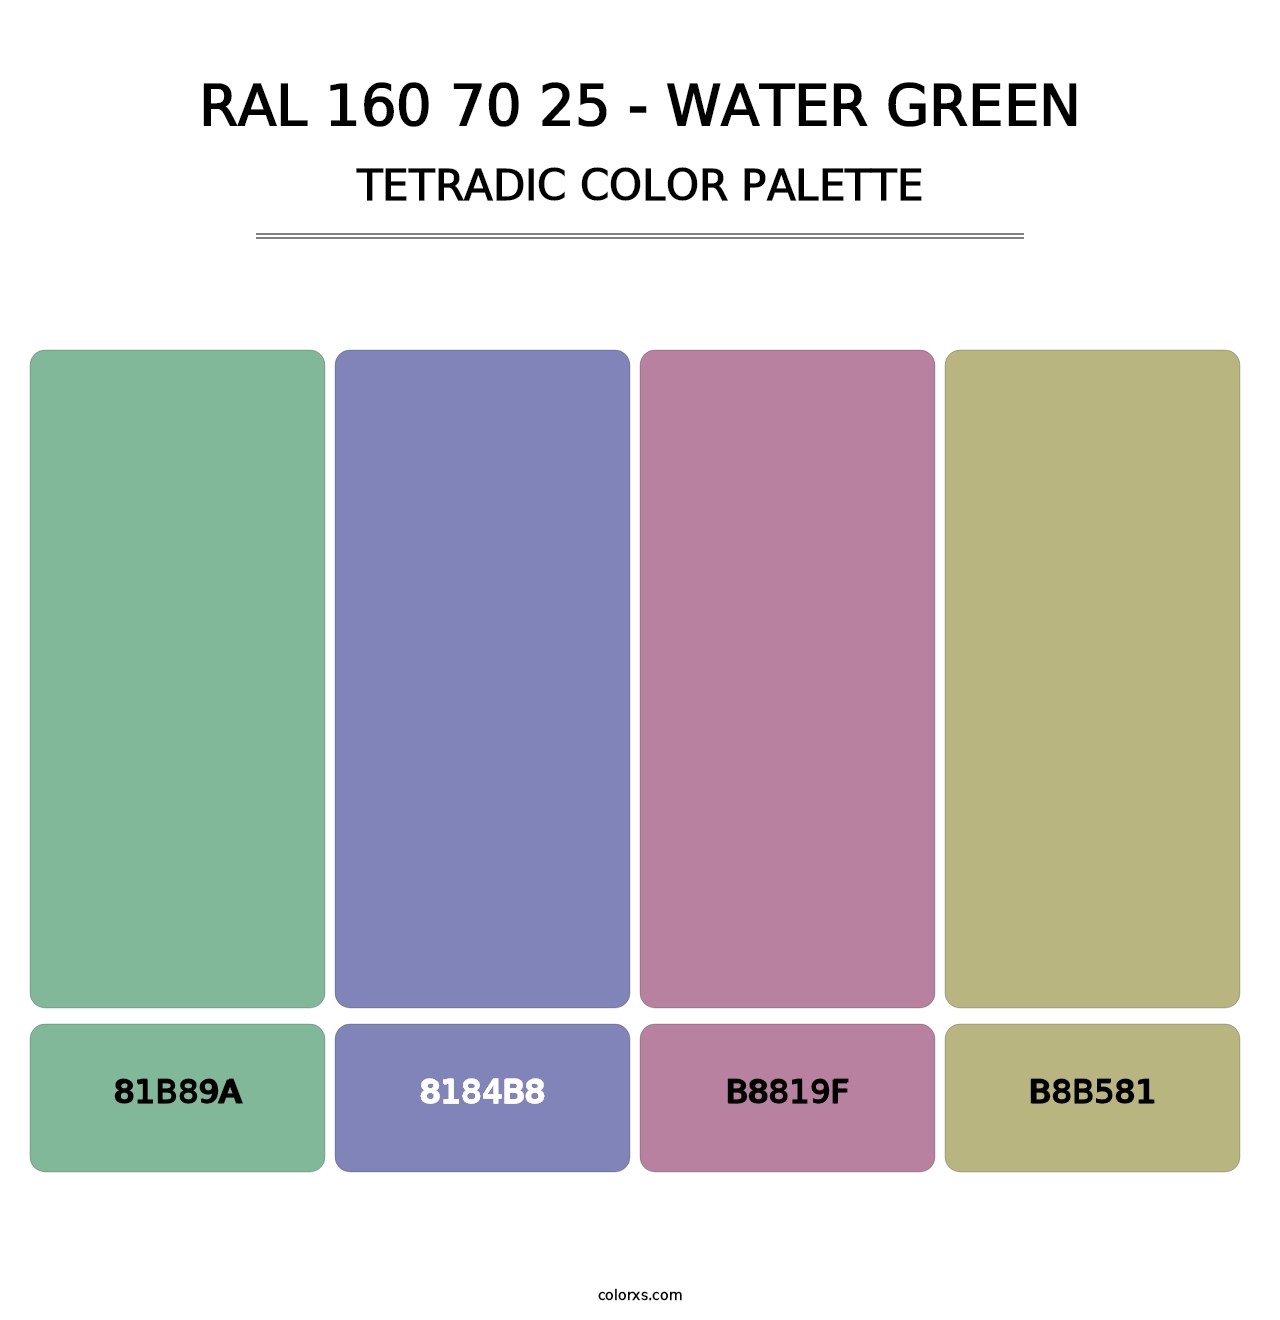 RAL 160 70 25 - Water Green - Tetradic Color Palette